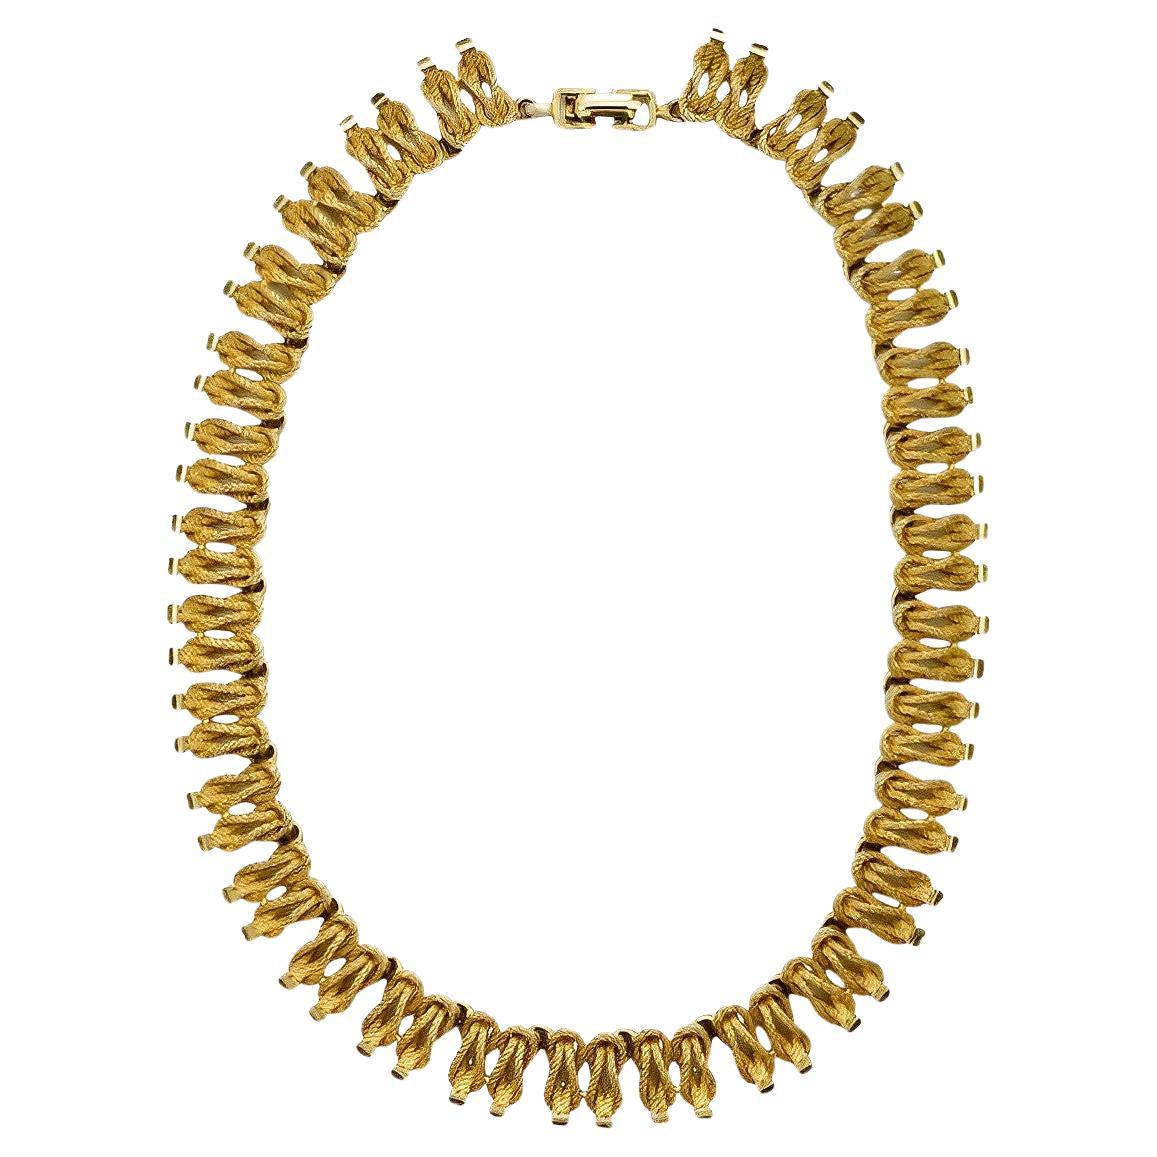 Gold Plated Textured Knot Design Link Necklace circa 1950s For Sale